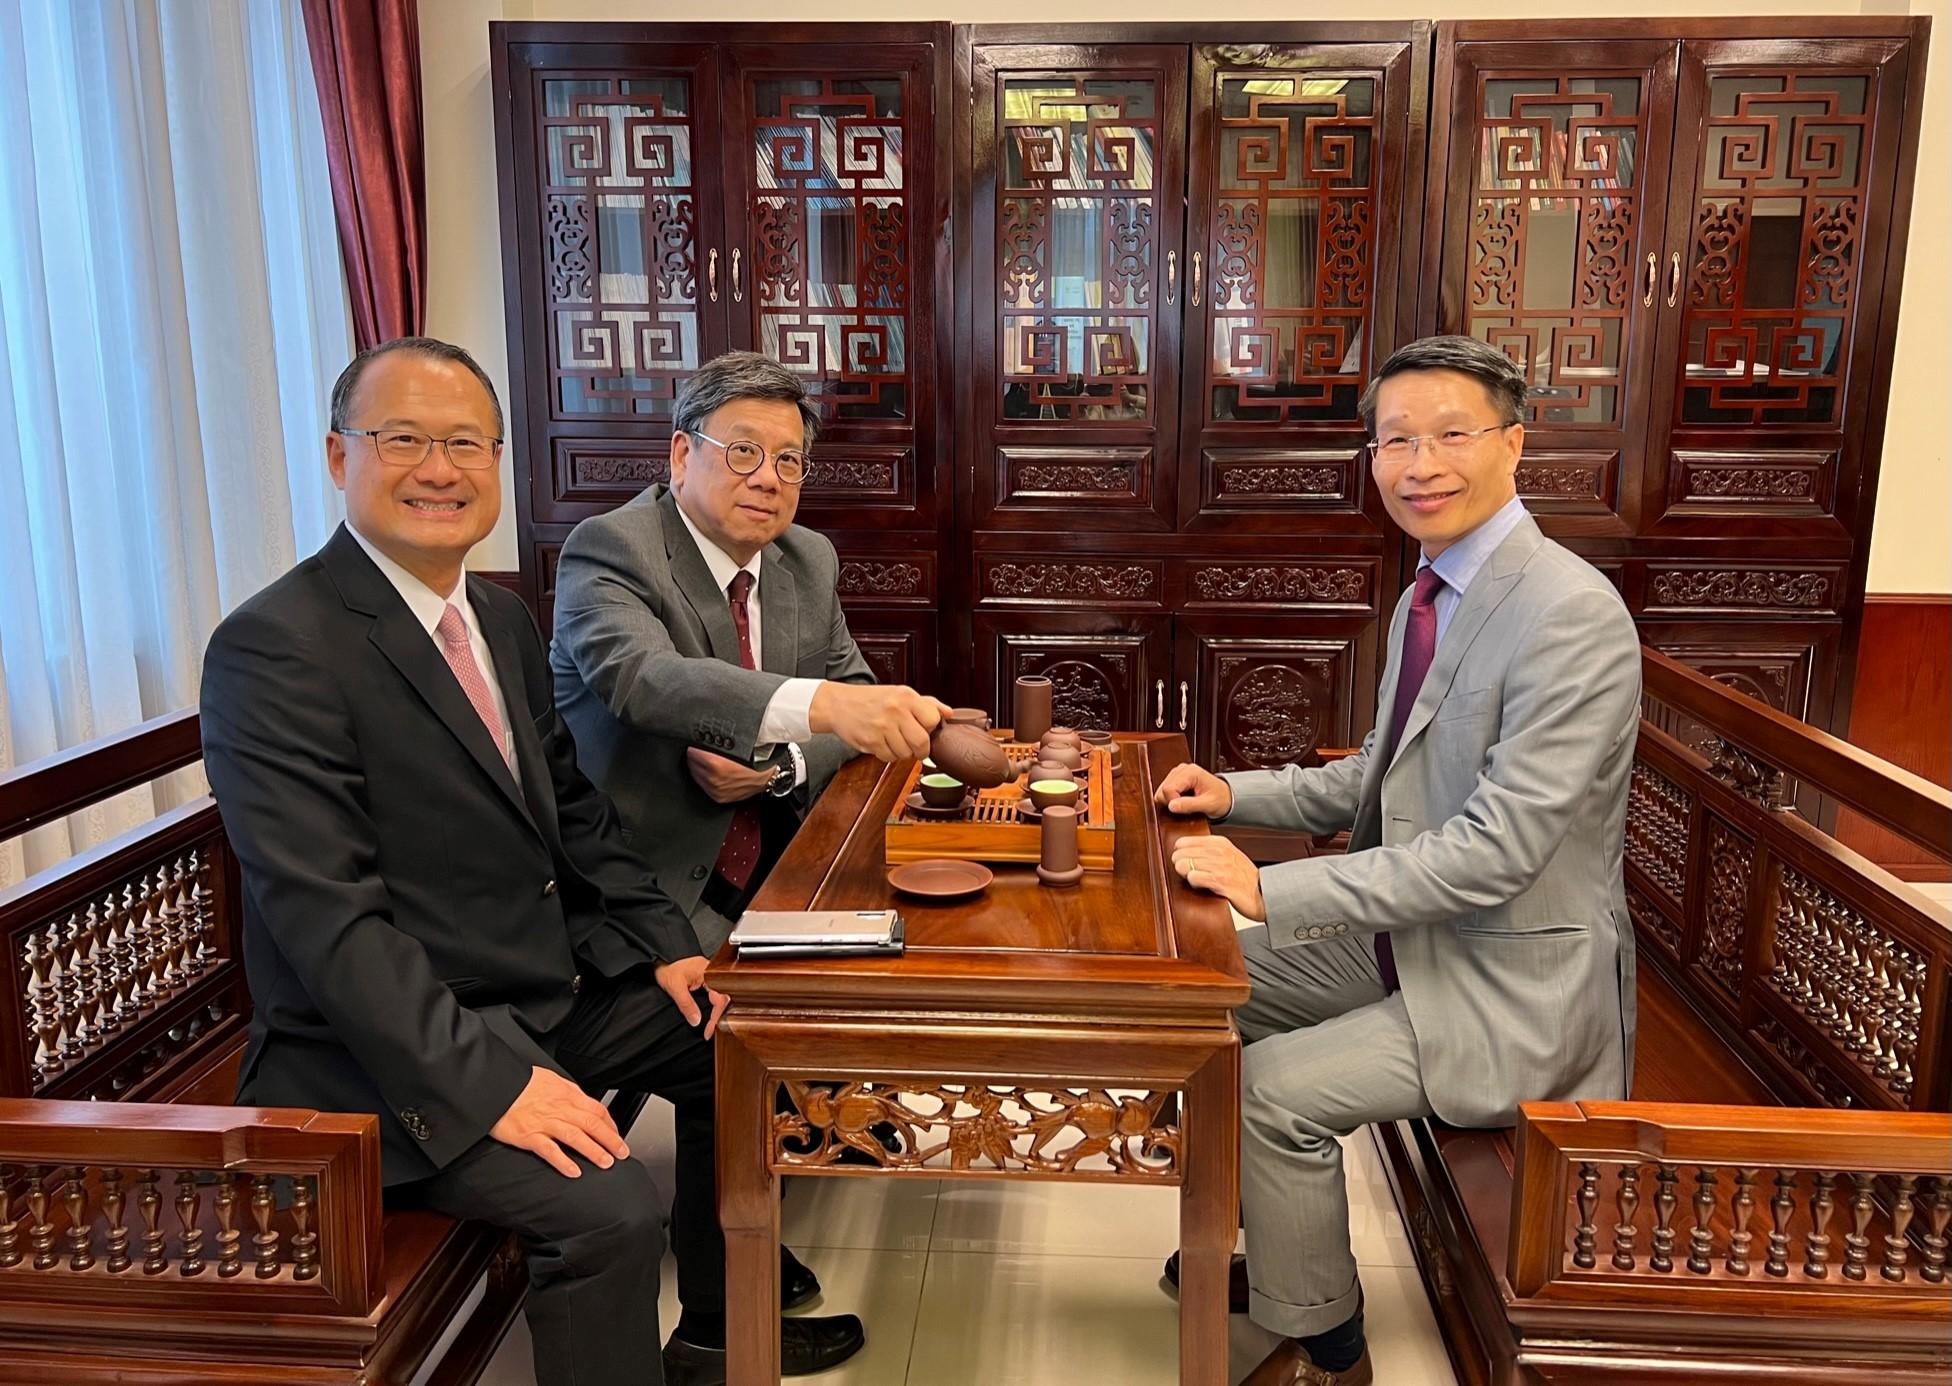 The Secretary for Commerce and Economic Development, Mr Algernon Yau (centre), yesterday (January 8) visited the ULIS - Jonathan KS Choi Cultural Centre in Vietnam National University to get a better understanding of Vietnam's education development and cultural exchange. Joining him were the Chairman of the Chinese General Chamber of Commerce, Hong Kong, Dr Jonathan Choi (left), and the Consul-General of Vietnam in Hong Kong, Mr Pham Binh Dam (right).